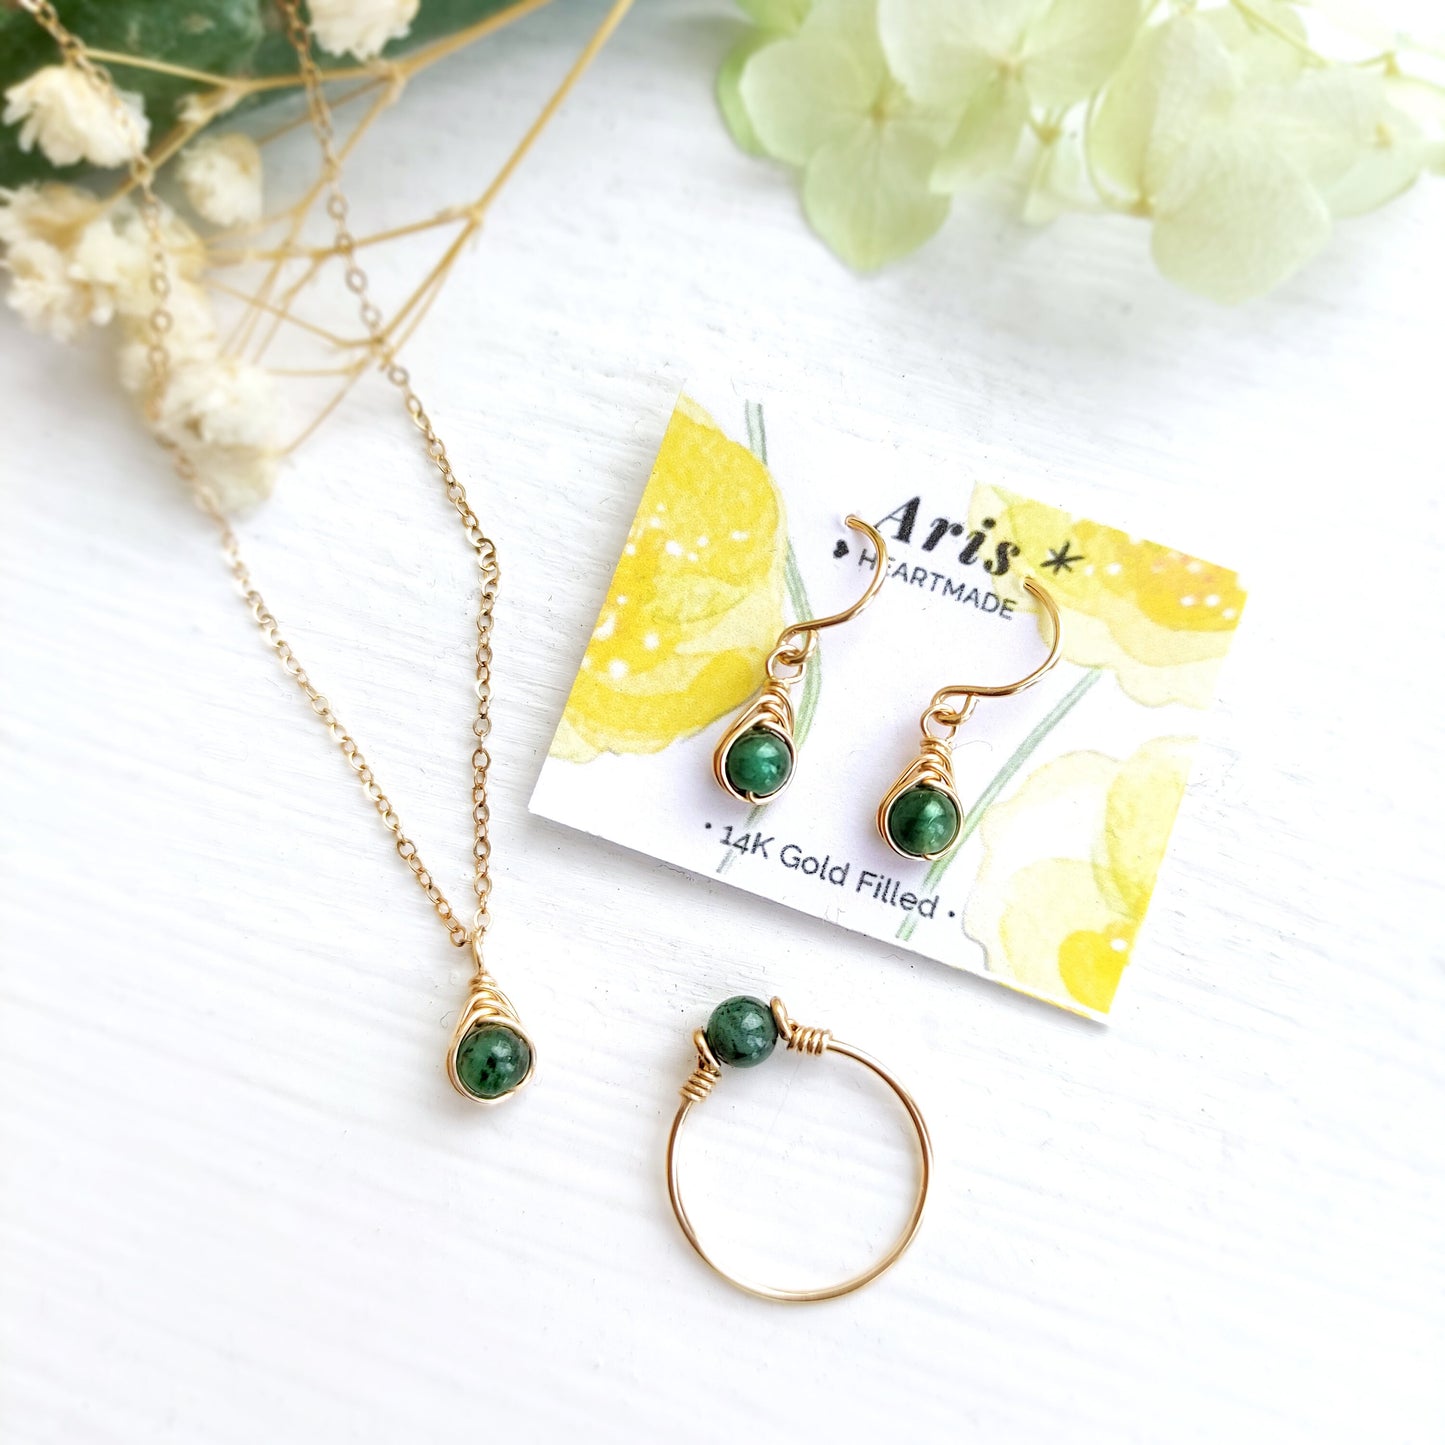 Long Emerald Earrings and Necklace Set Jewelry Set Emerald Jewelry Bri –  Little Desirez Jewelry